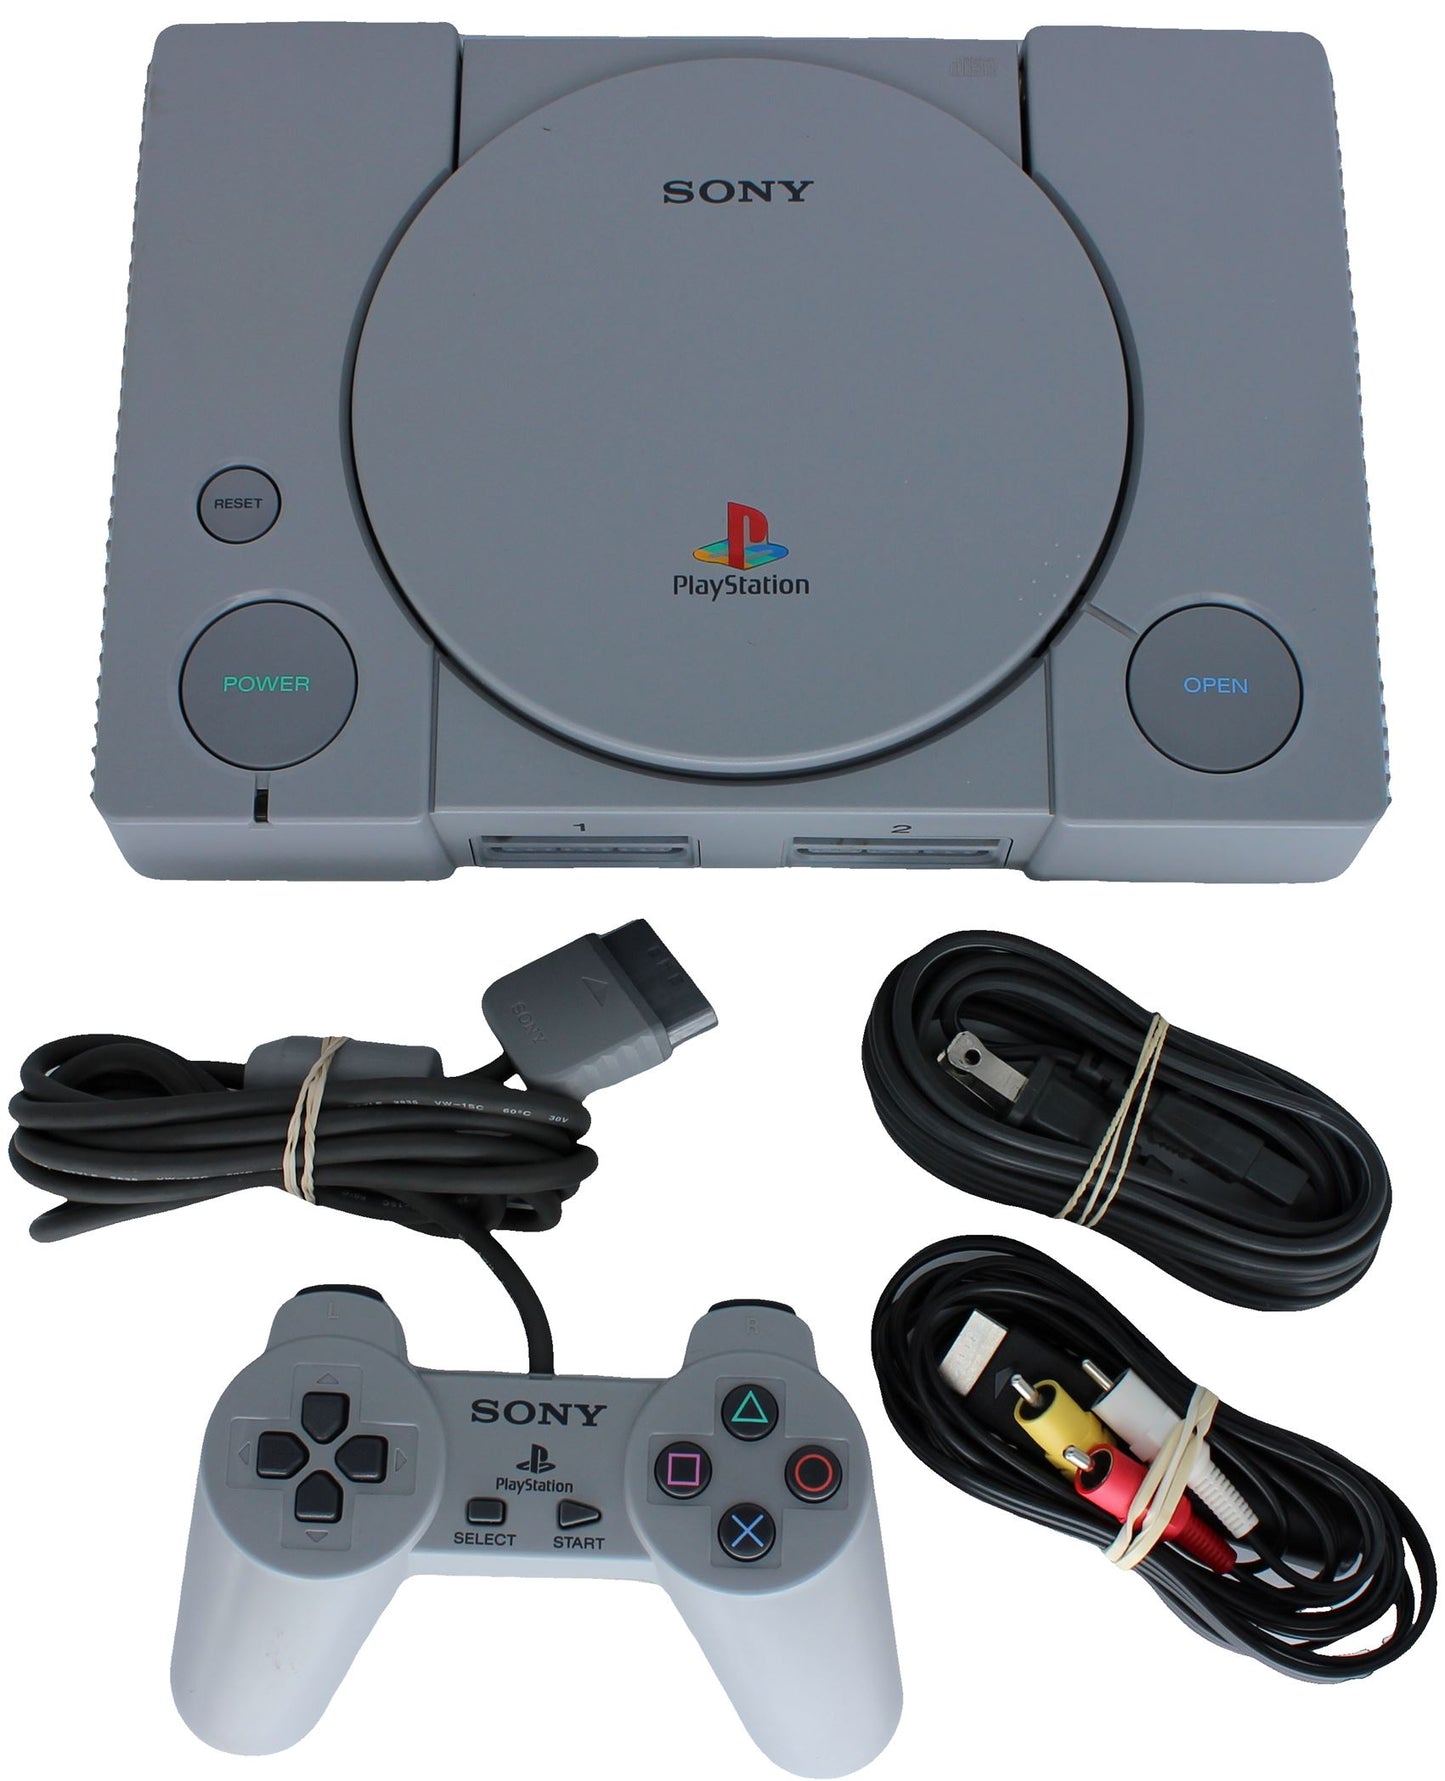 Sony PlayStation (PS1) Dual-Player Bundle